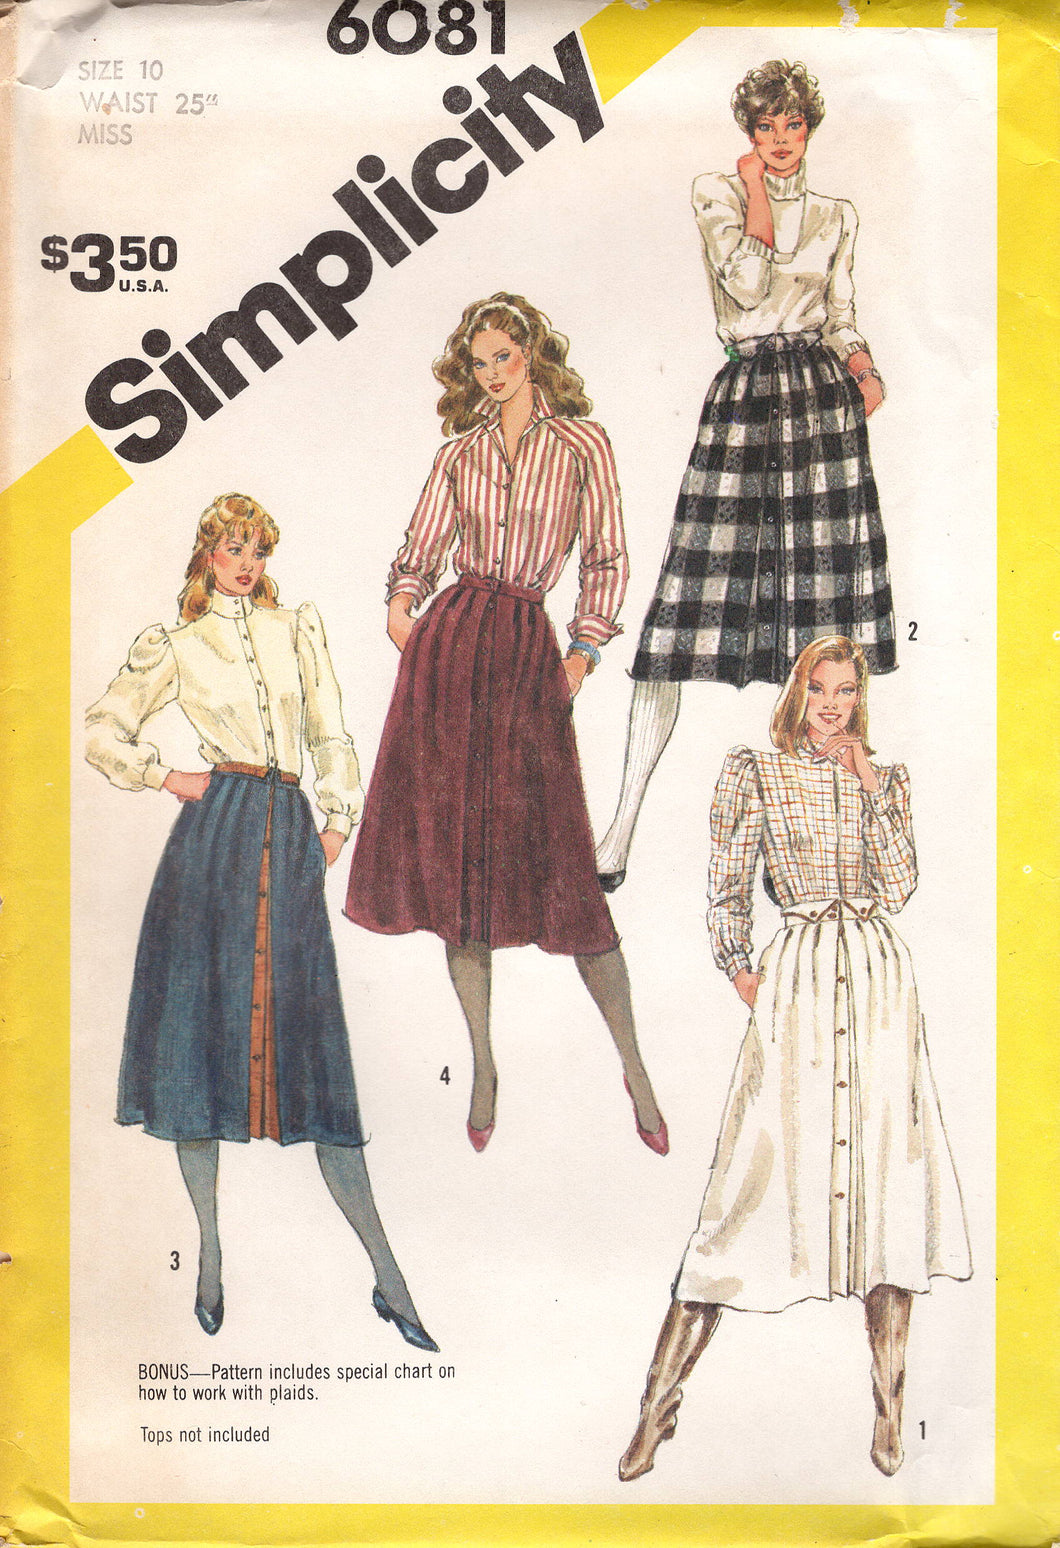 1980's Simplicity Set of Pleated Skirts with Button Front Pattern and Pockets - Waist 25